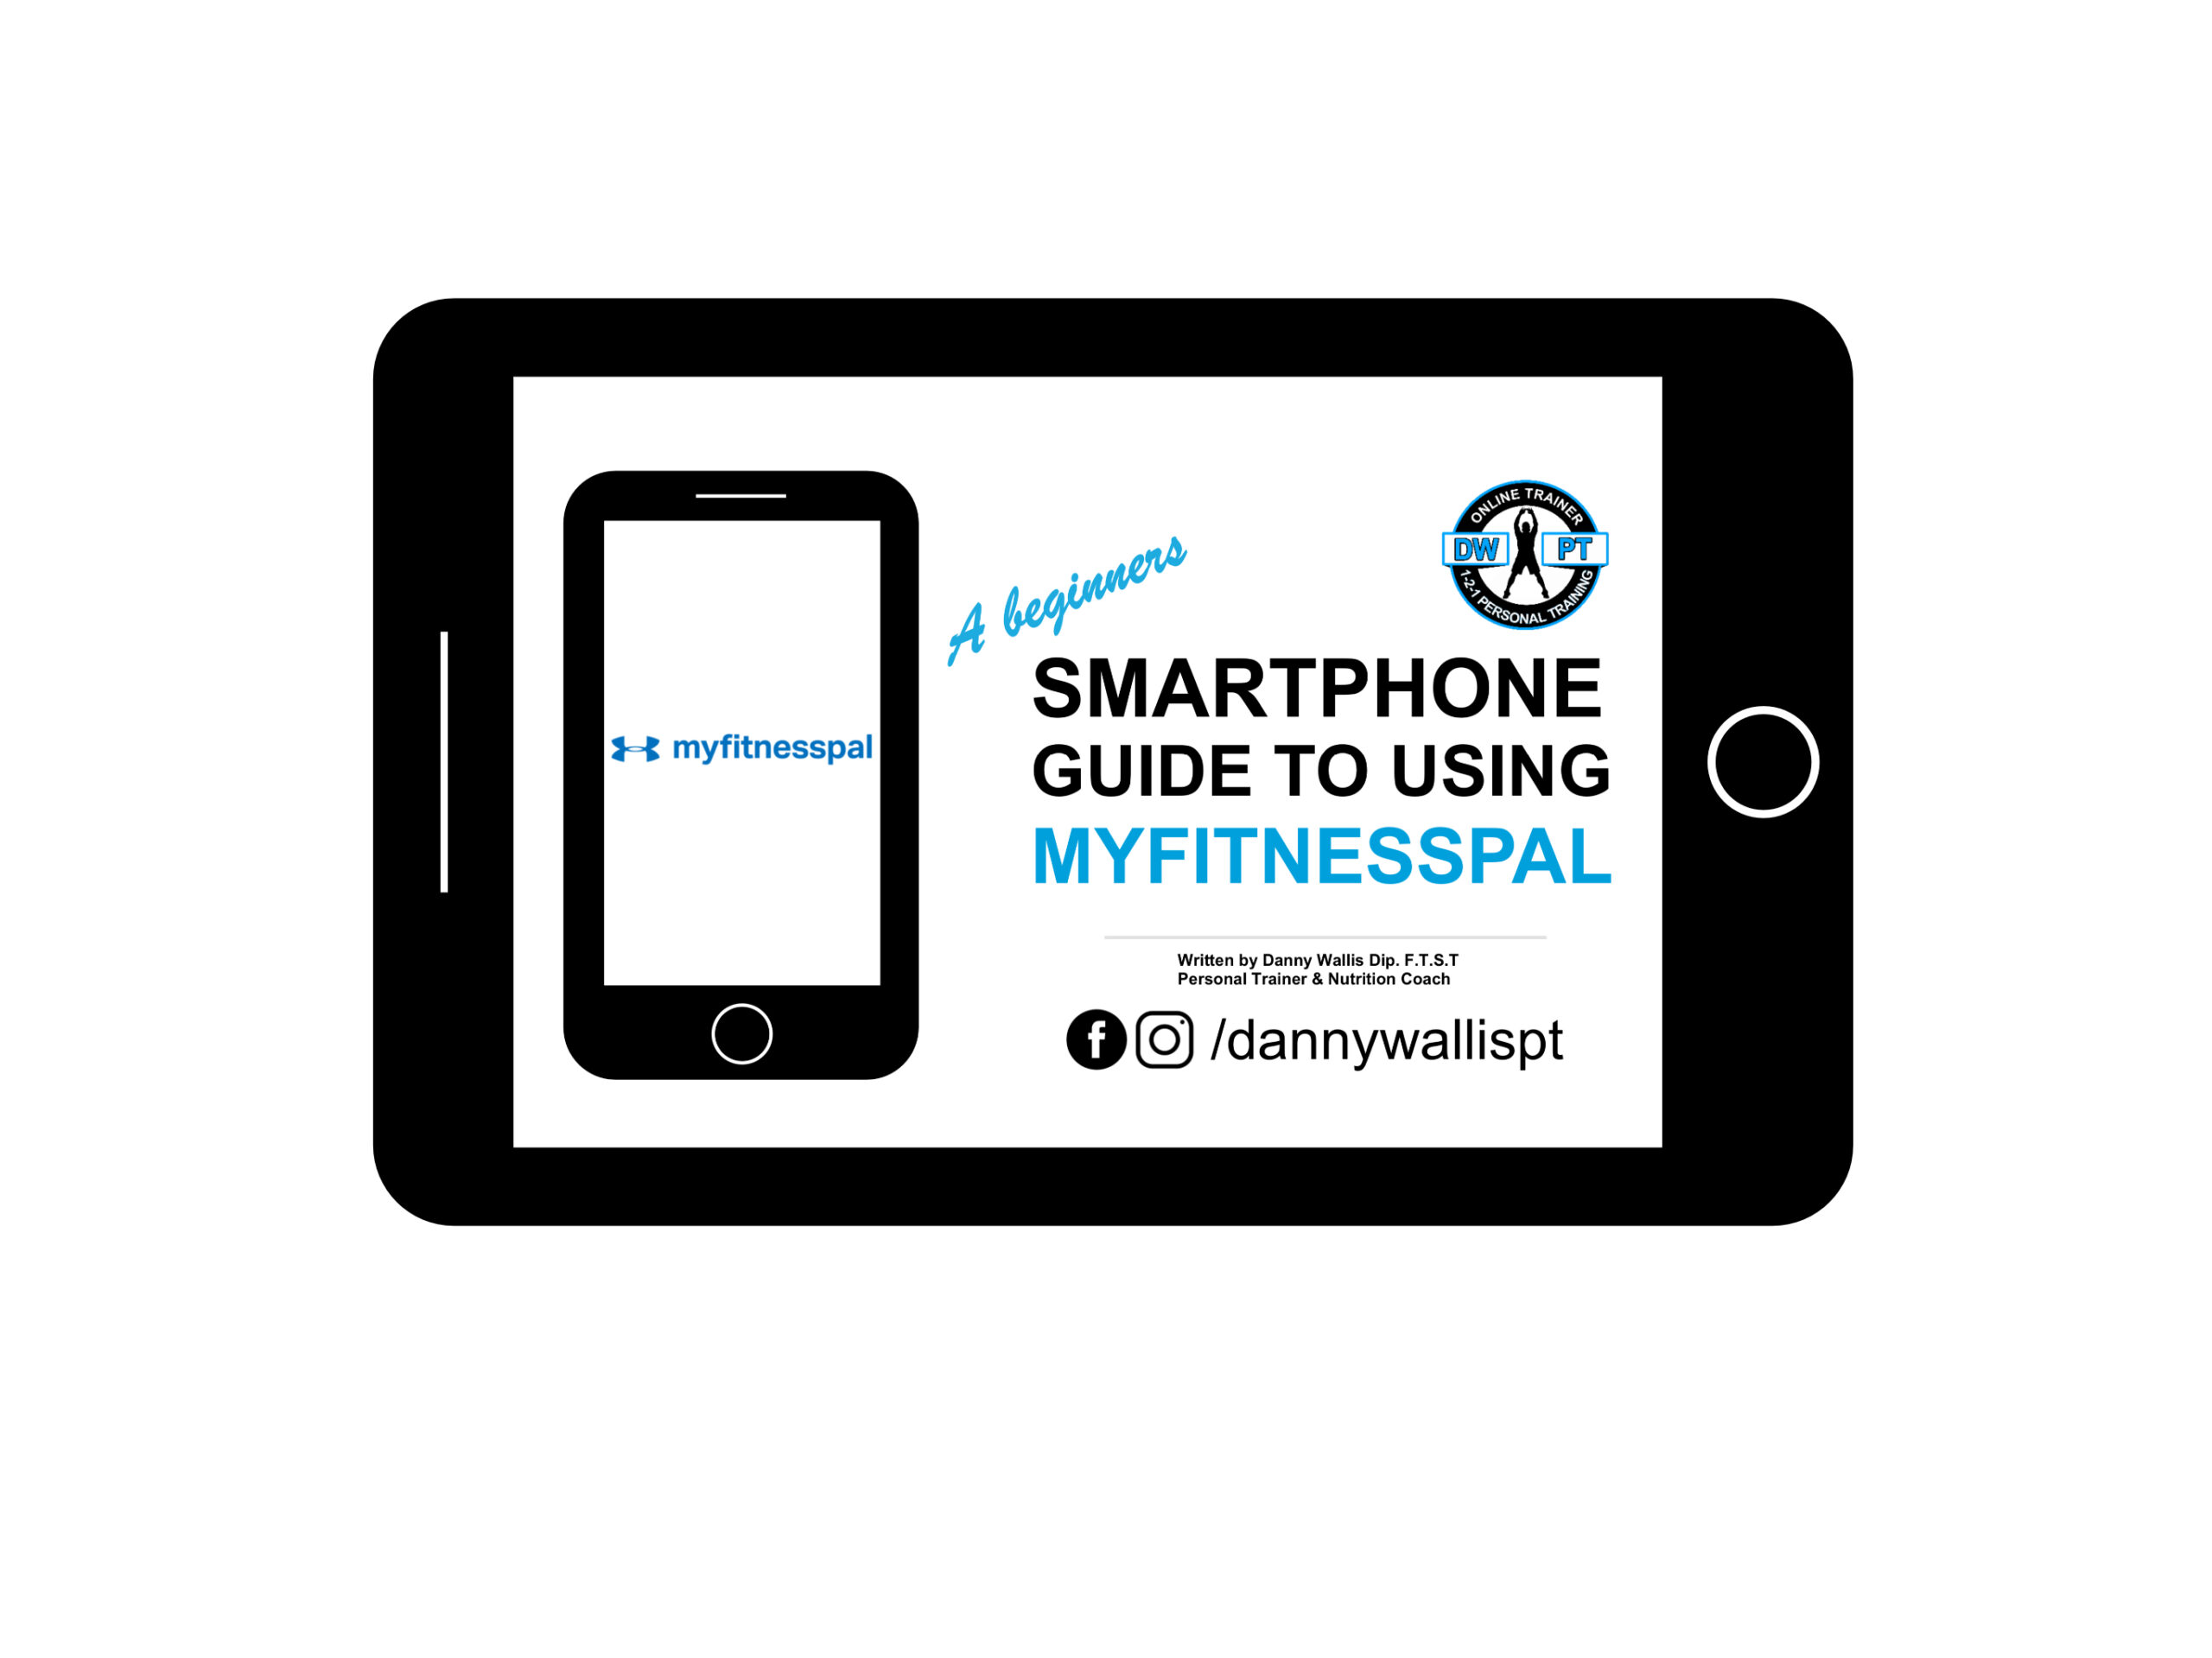 A Beginners Smartphone Guide to Using Myfitnesspal